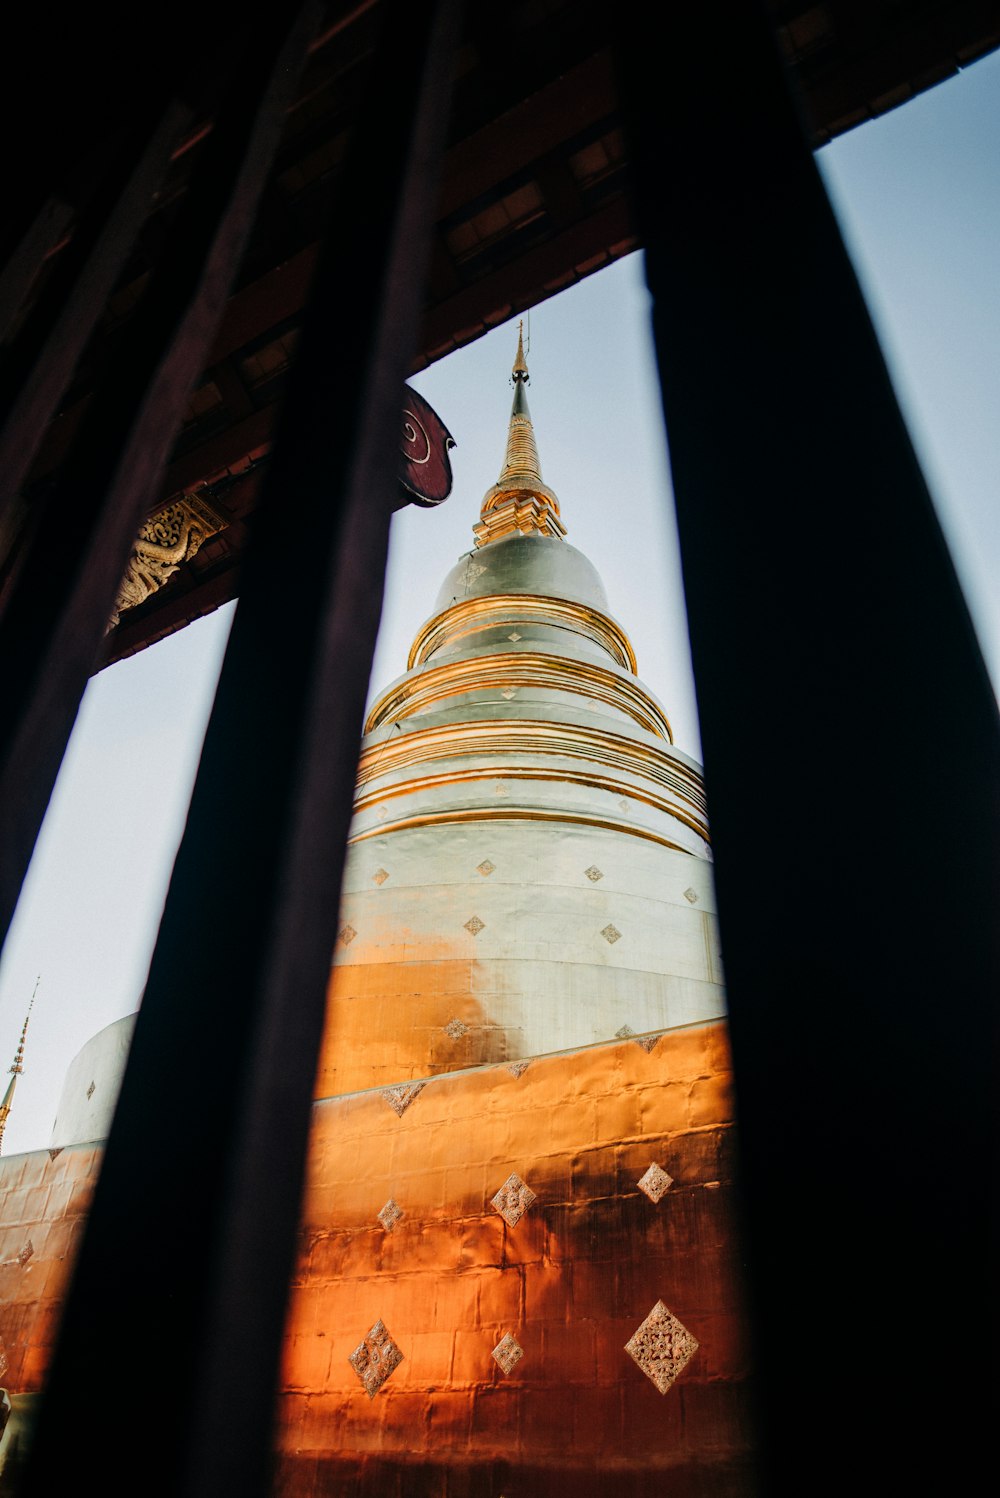 a view of a golden and white pagoda through a window